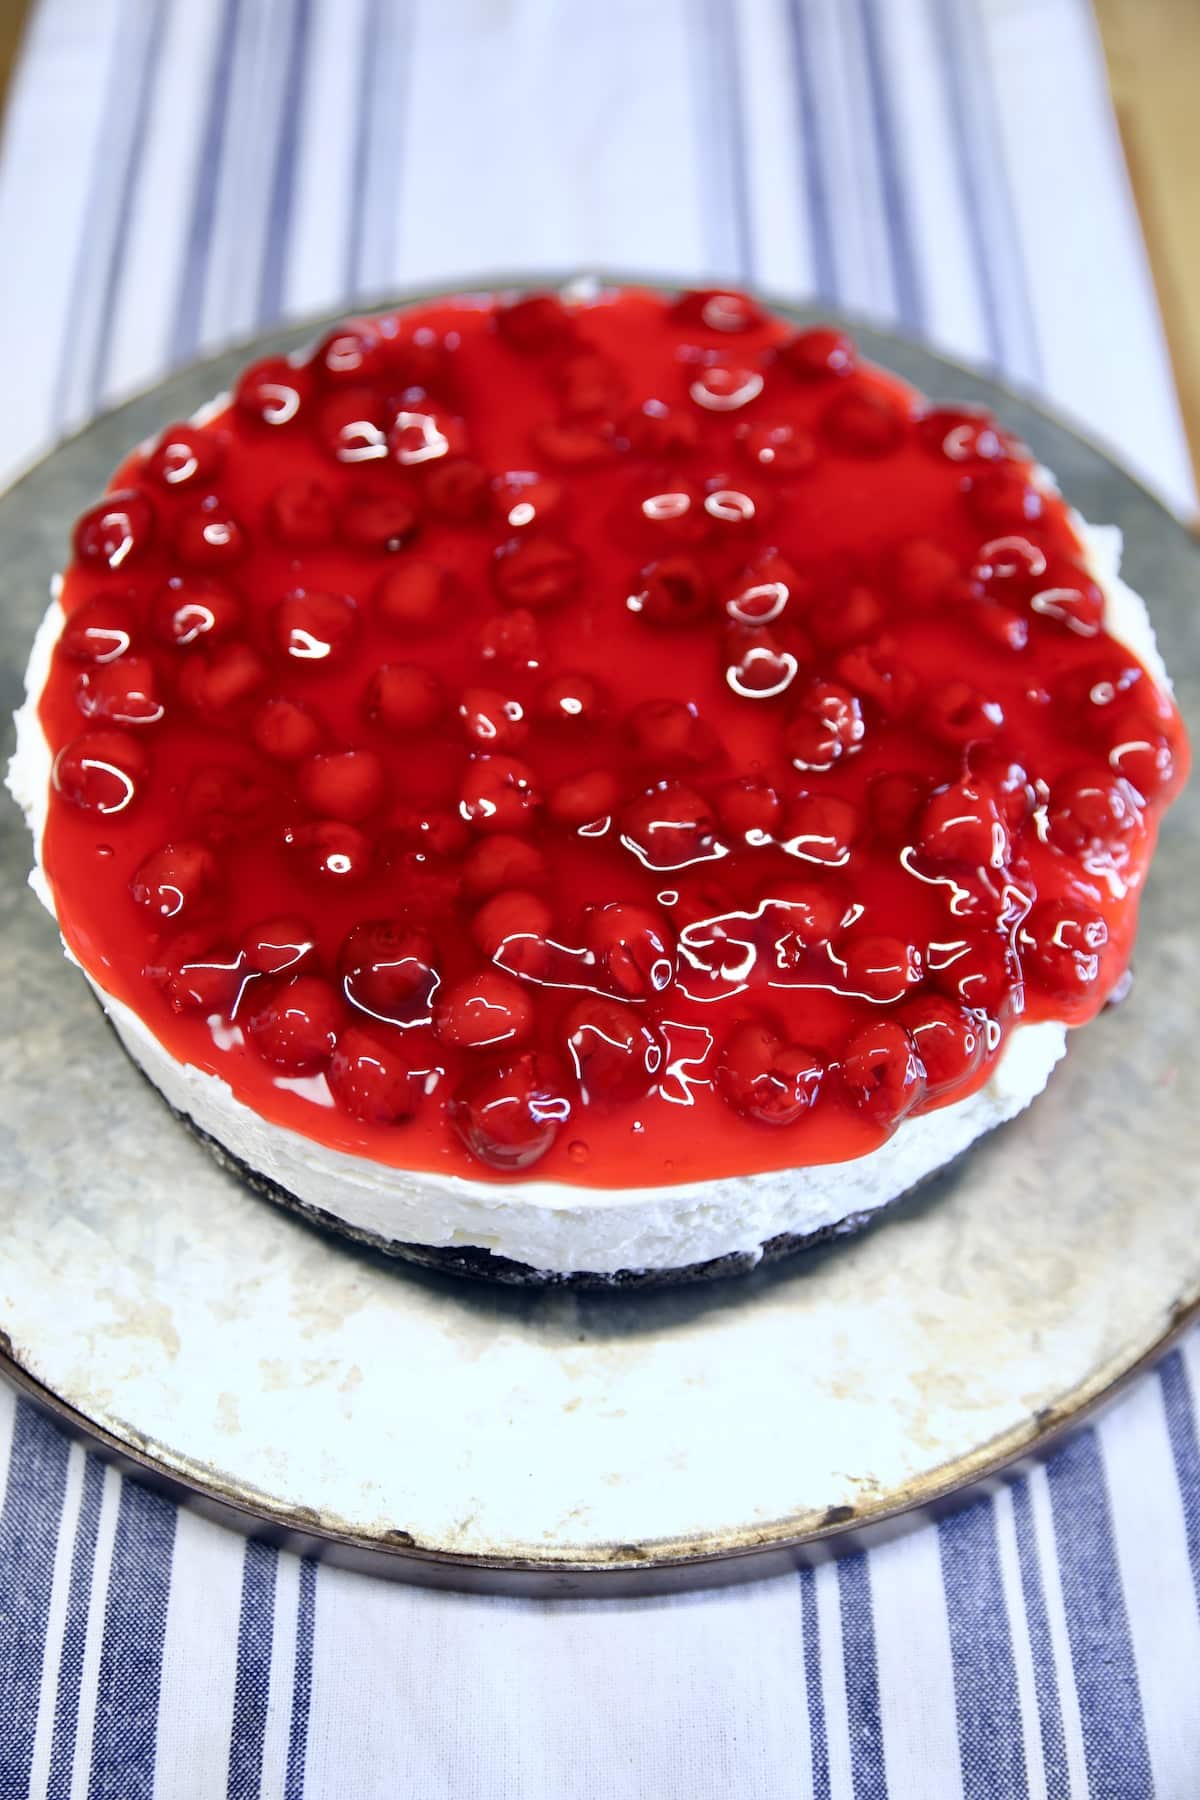 Cherry cheesecake on a platter.